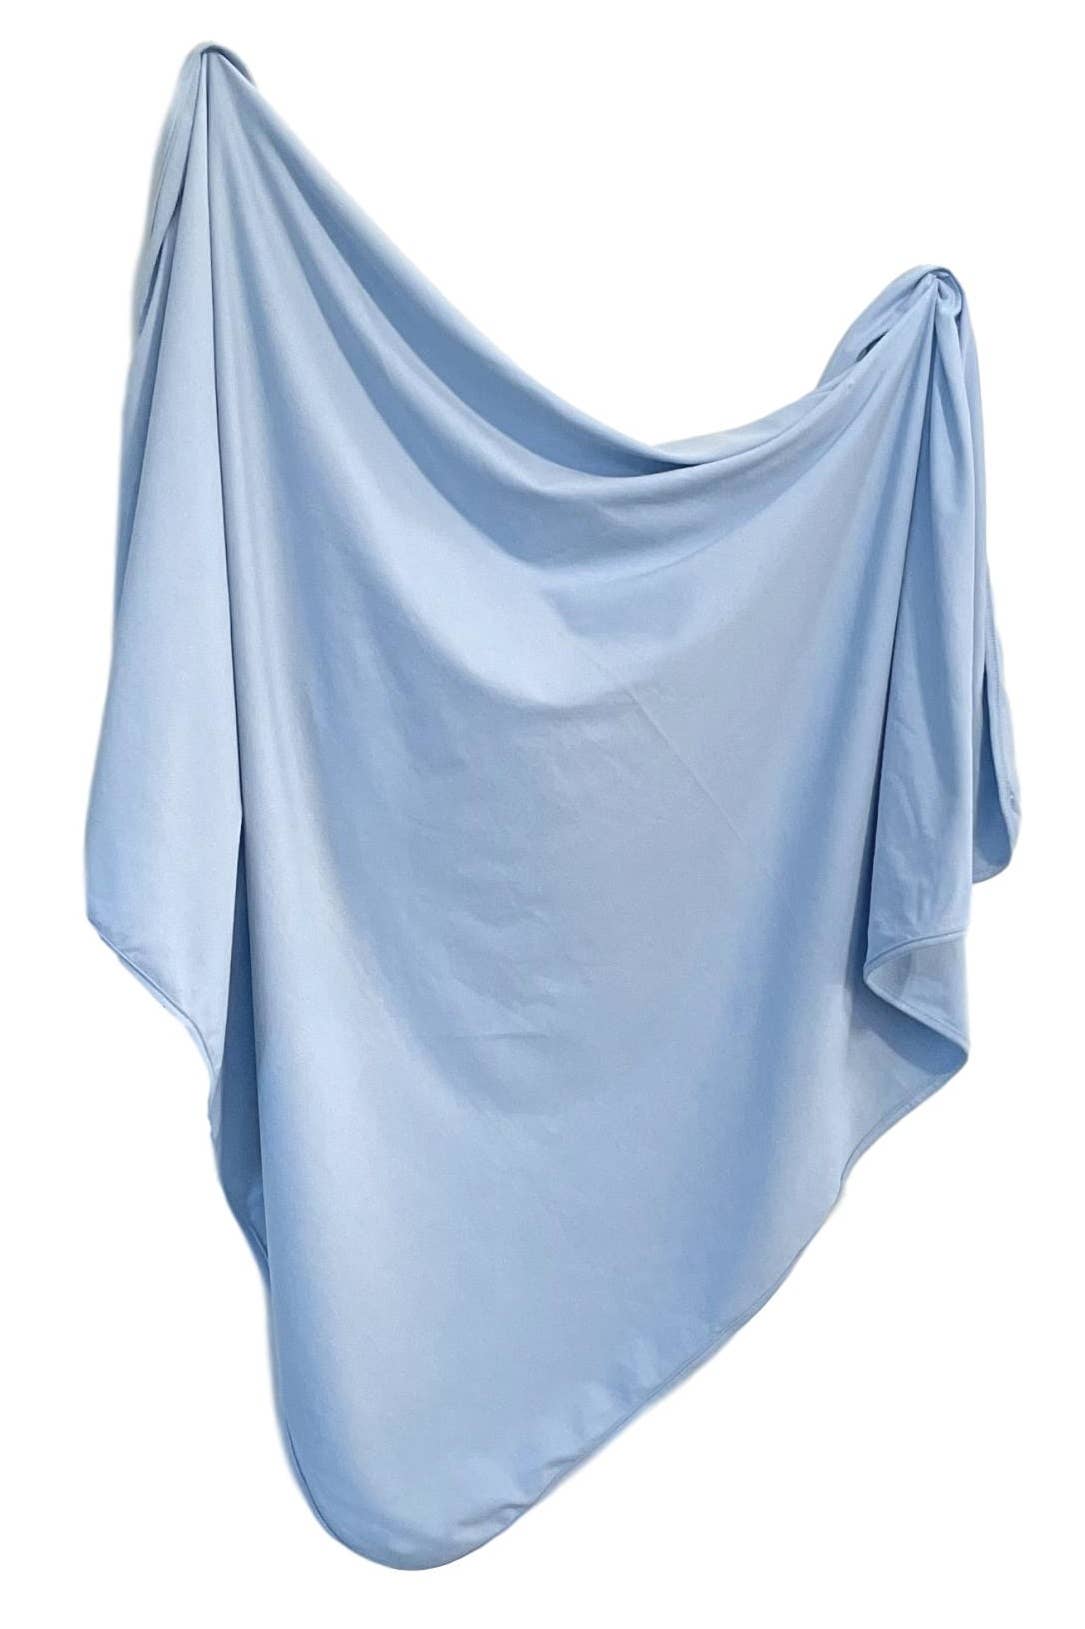 Fawn & Foster - Organic Cotton Swaddle - River (light blue)